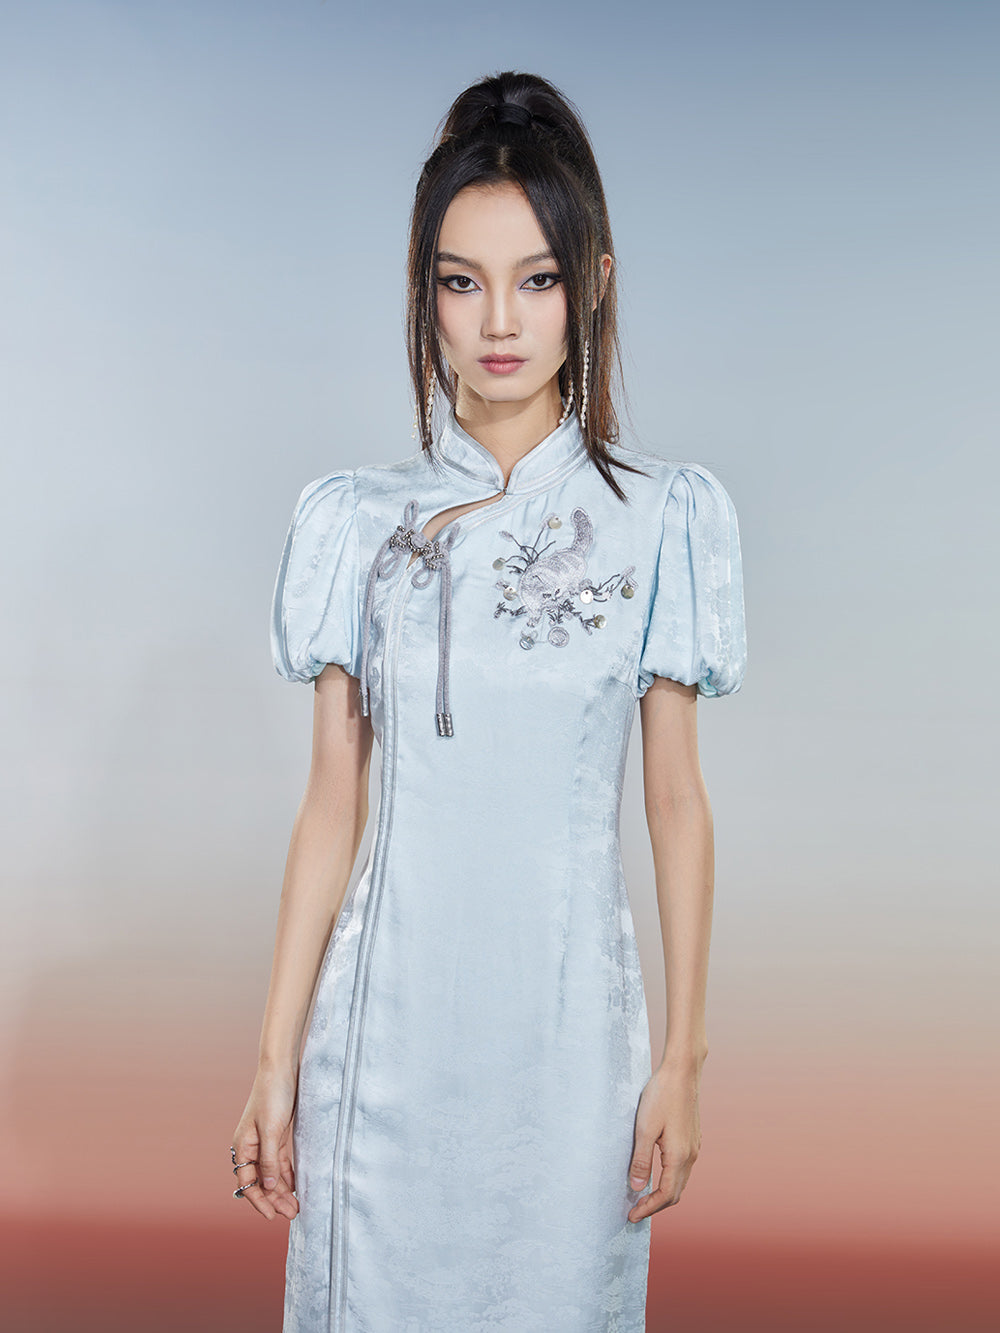 MUKZIN Charming Cheongsam Hollow Puff Sleeves Embroidered Slits